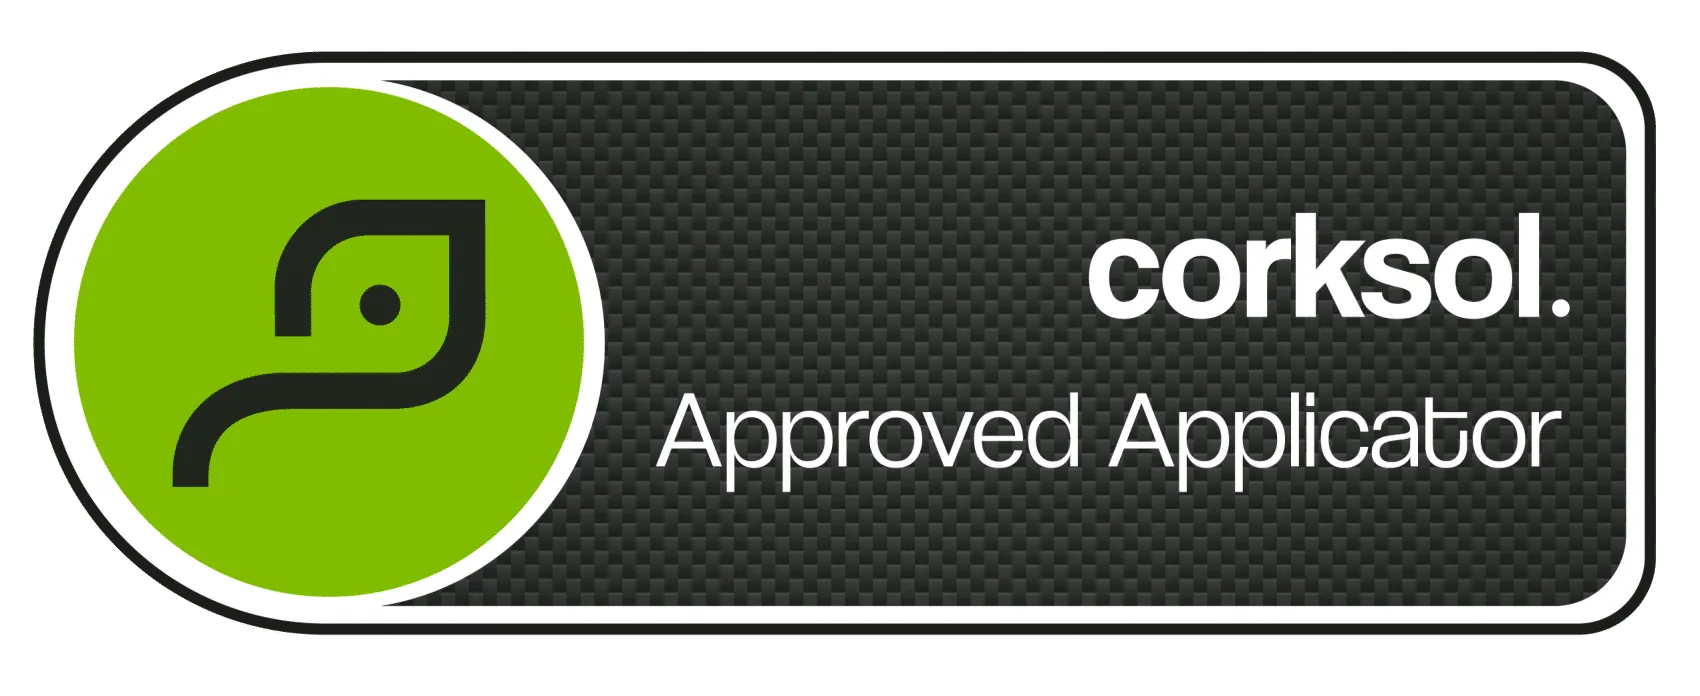 corksol approved applicator